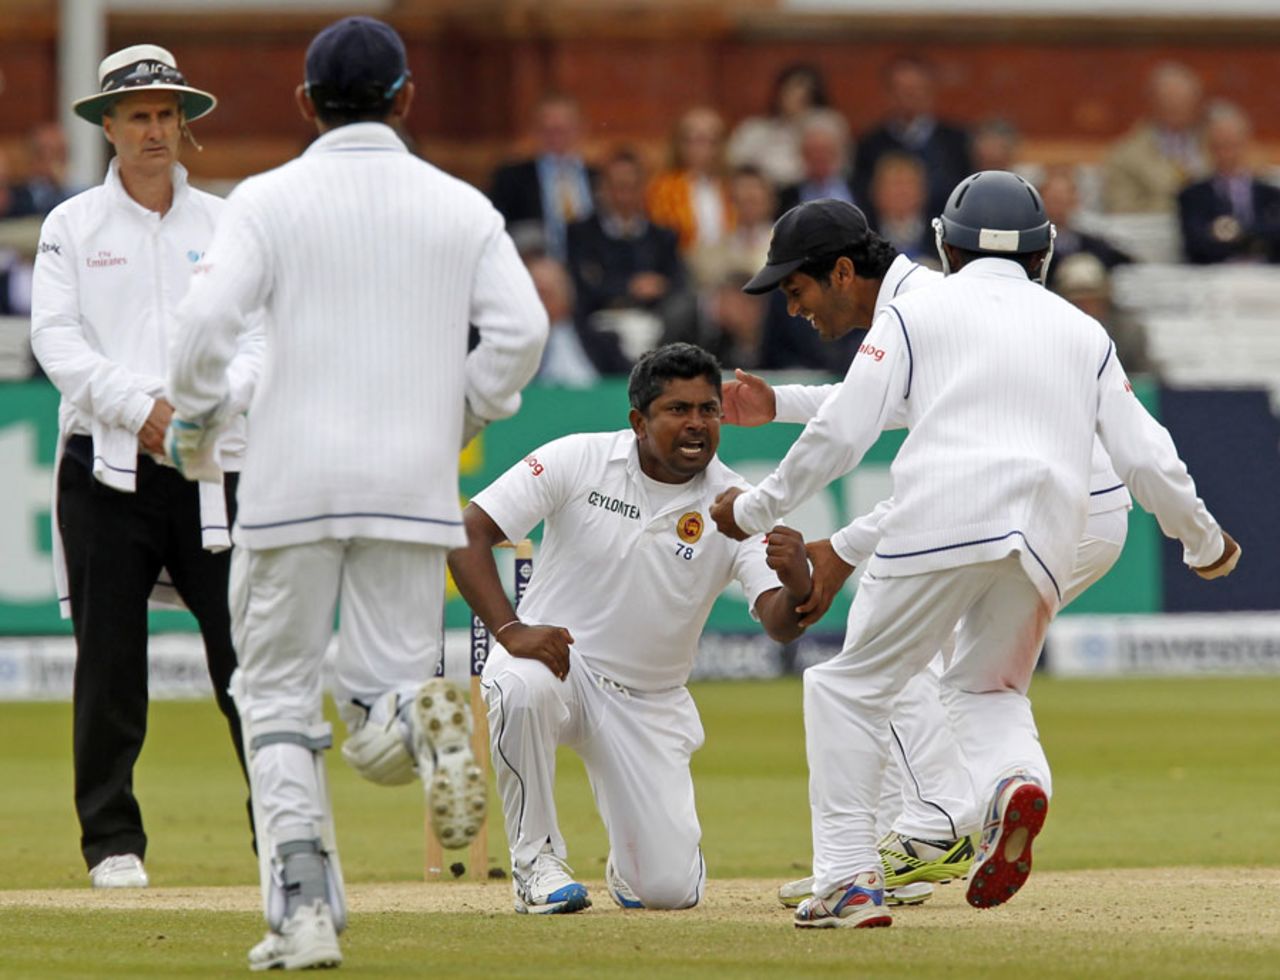 Rangana Herath was fired up at getting Moeen Ali, England v Sri Lanka, 1st Investec Test, Lord's, 4th day, June 15, 2014